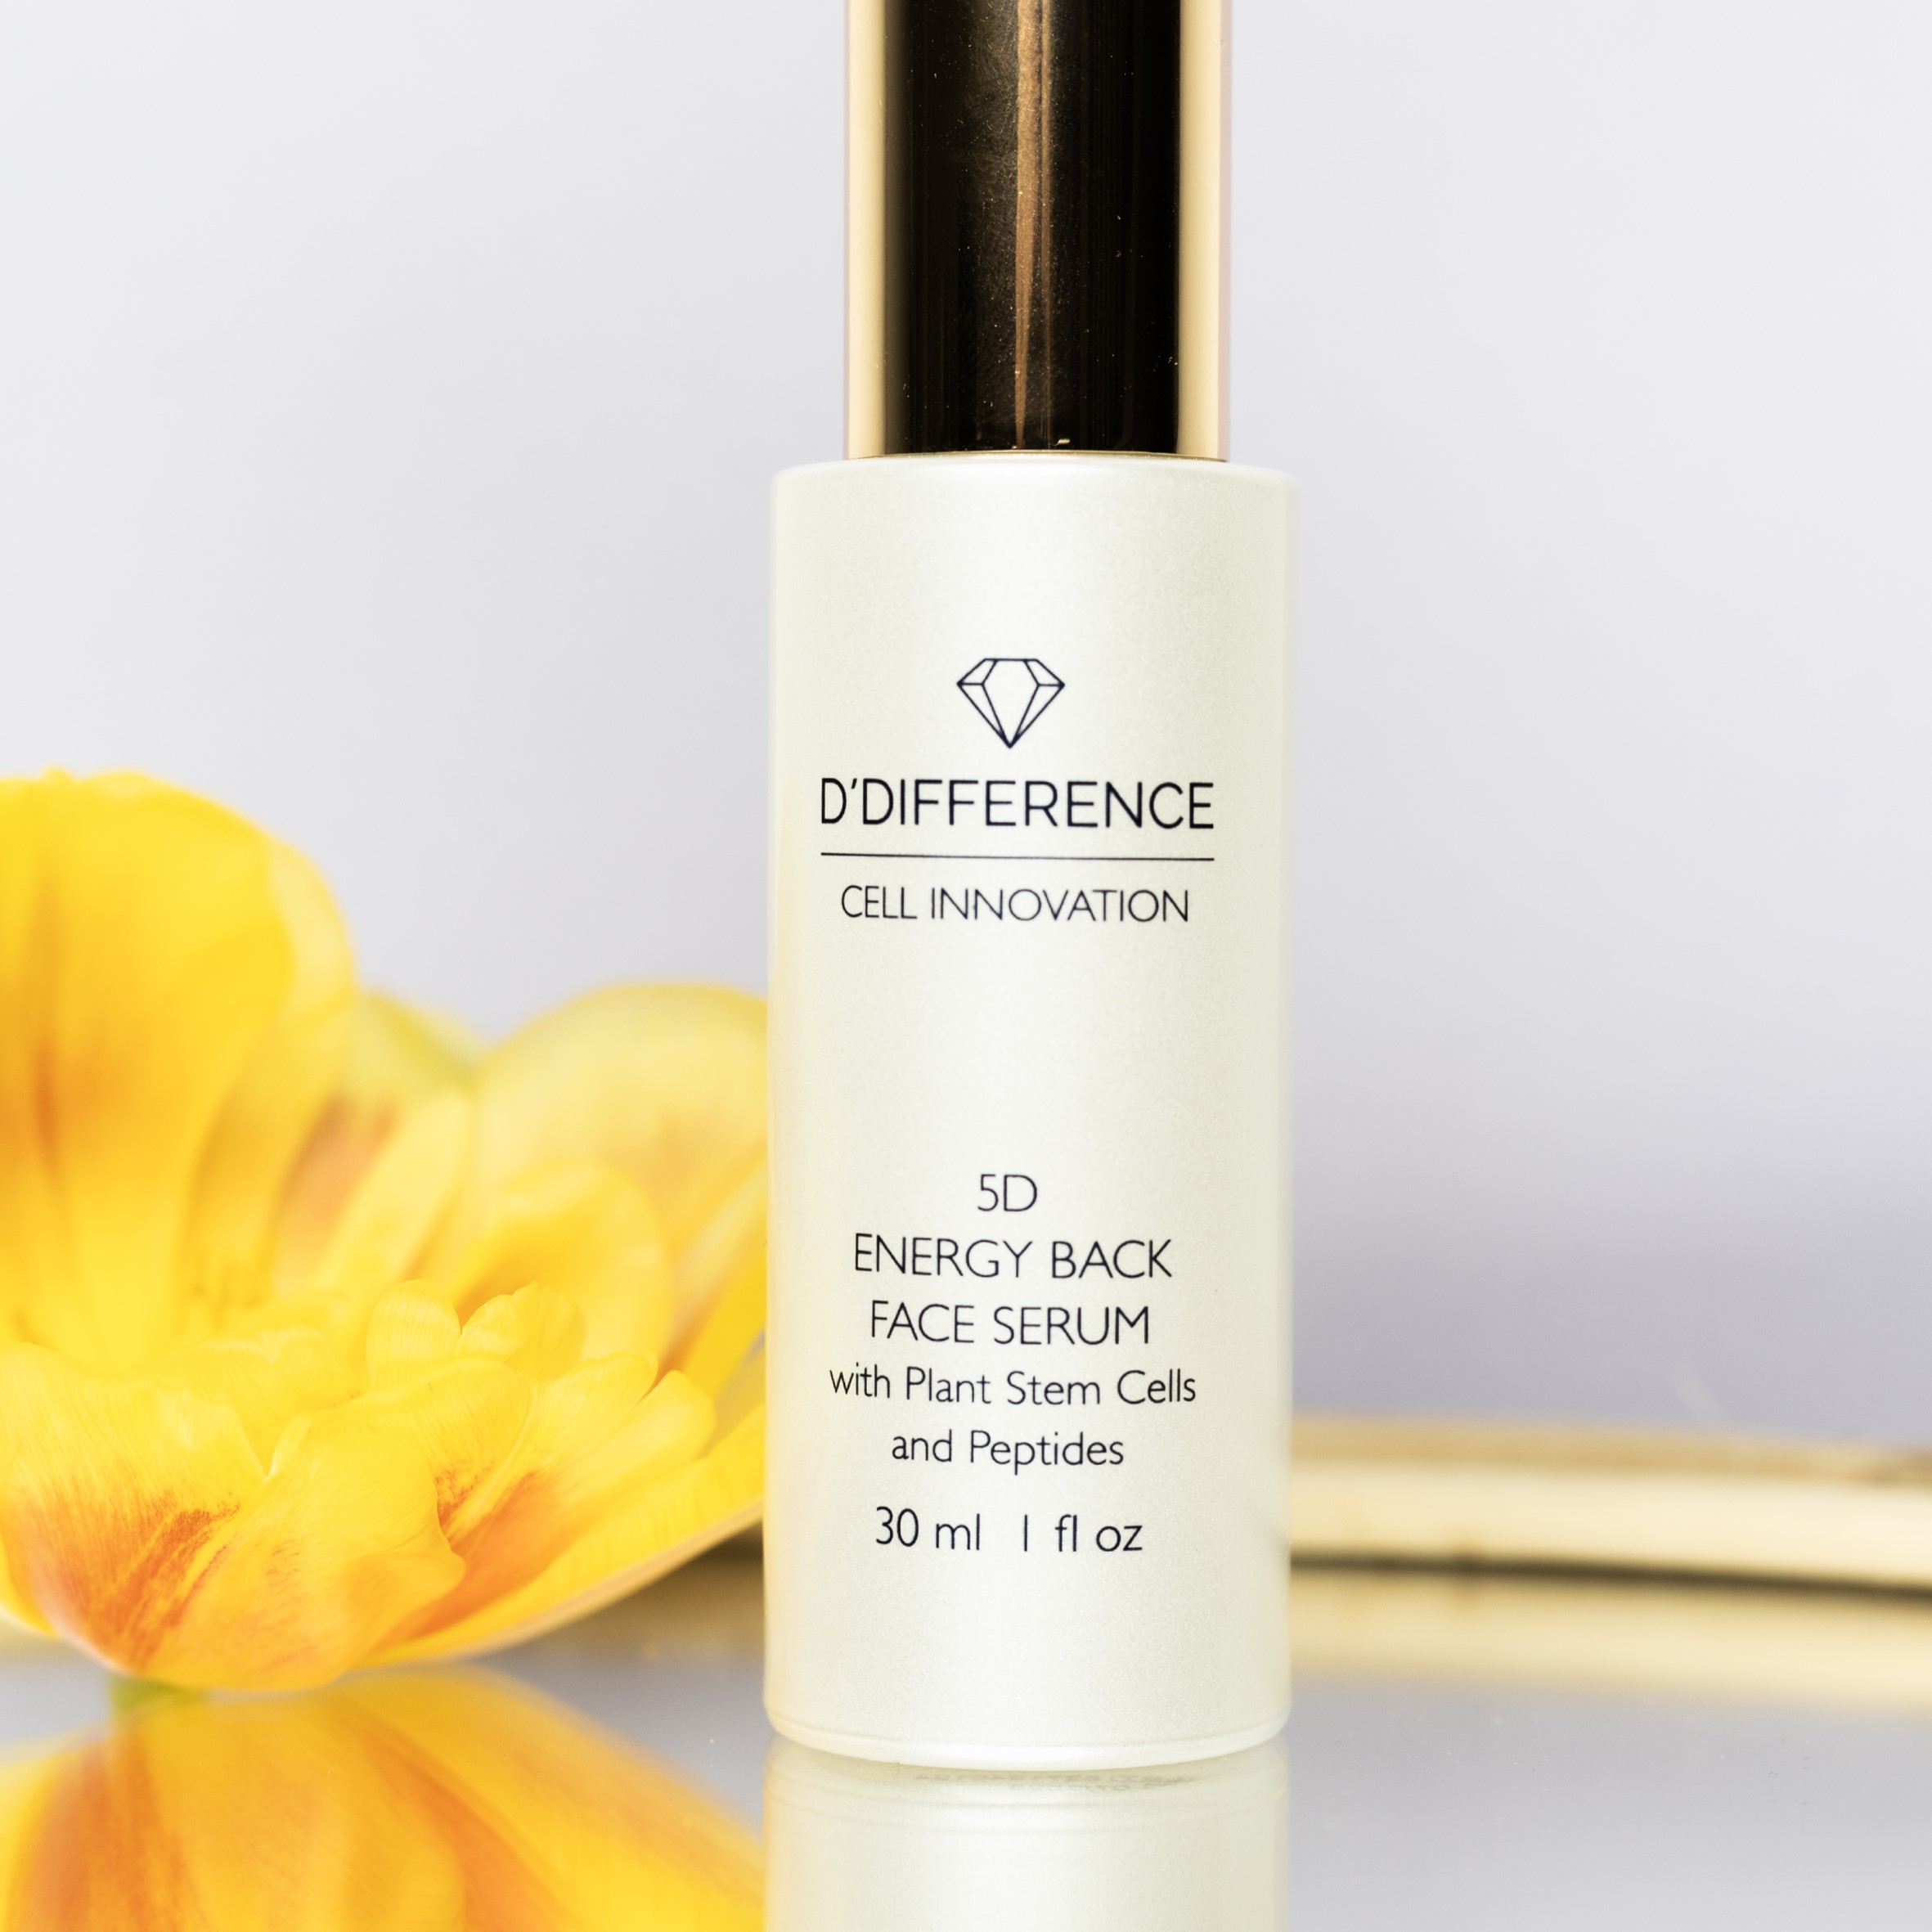 D'DIFFERENCE Cell Innocation 5D Energy Back Serum with Plant Stem Cells and Peptides pump bottle with a background of a yellow flower.